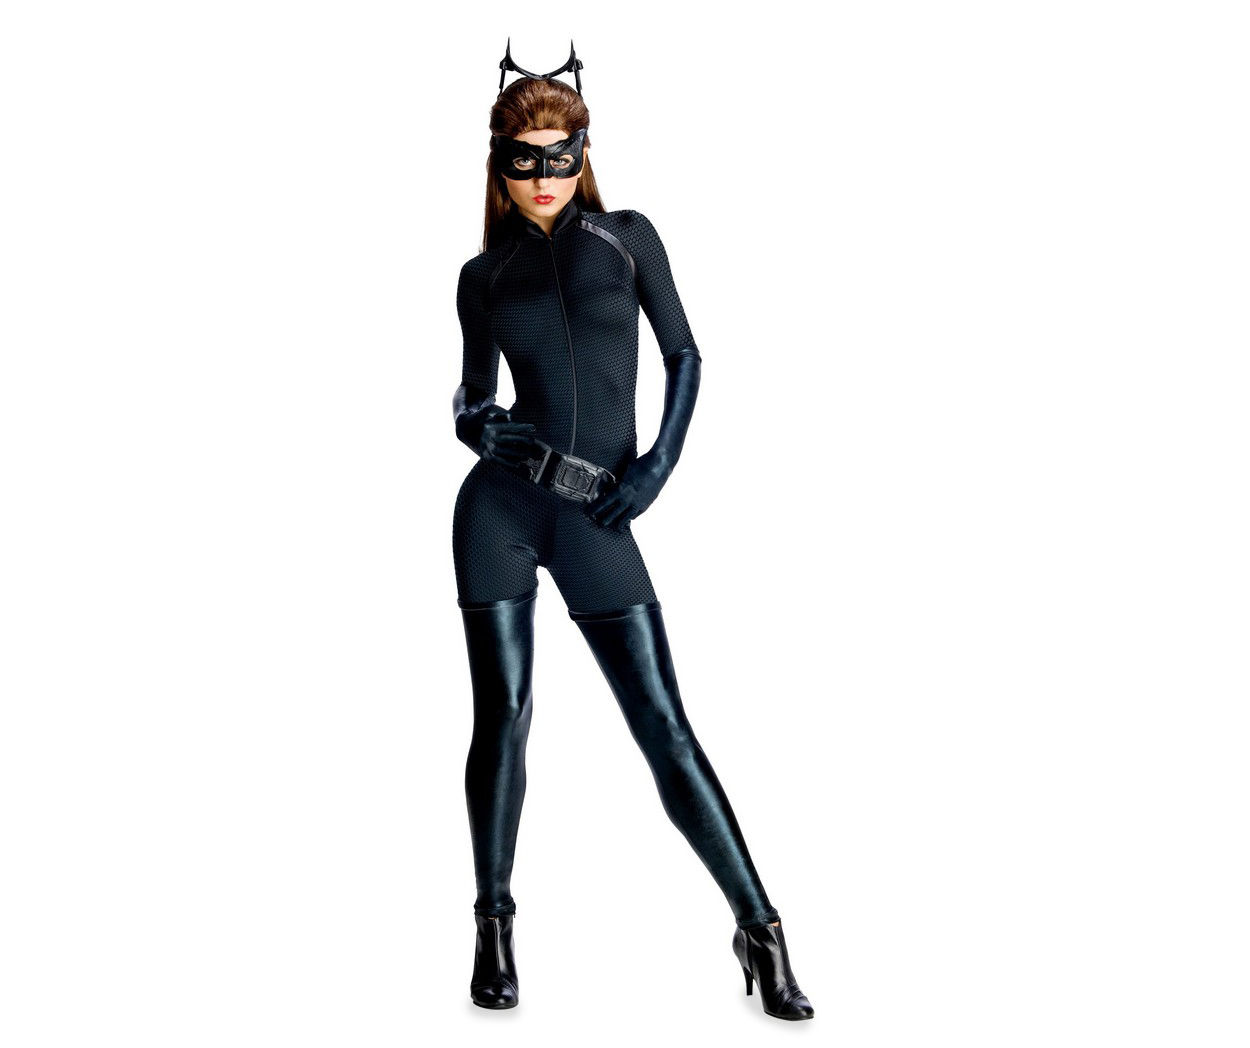 Adult Size X-Small The Dark Knight Rises Catwoman Costume